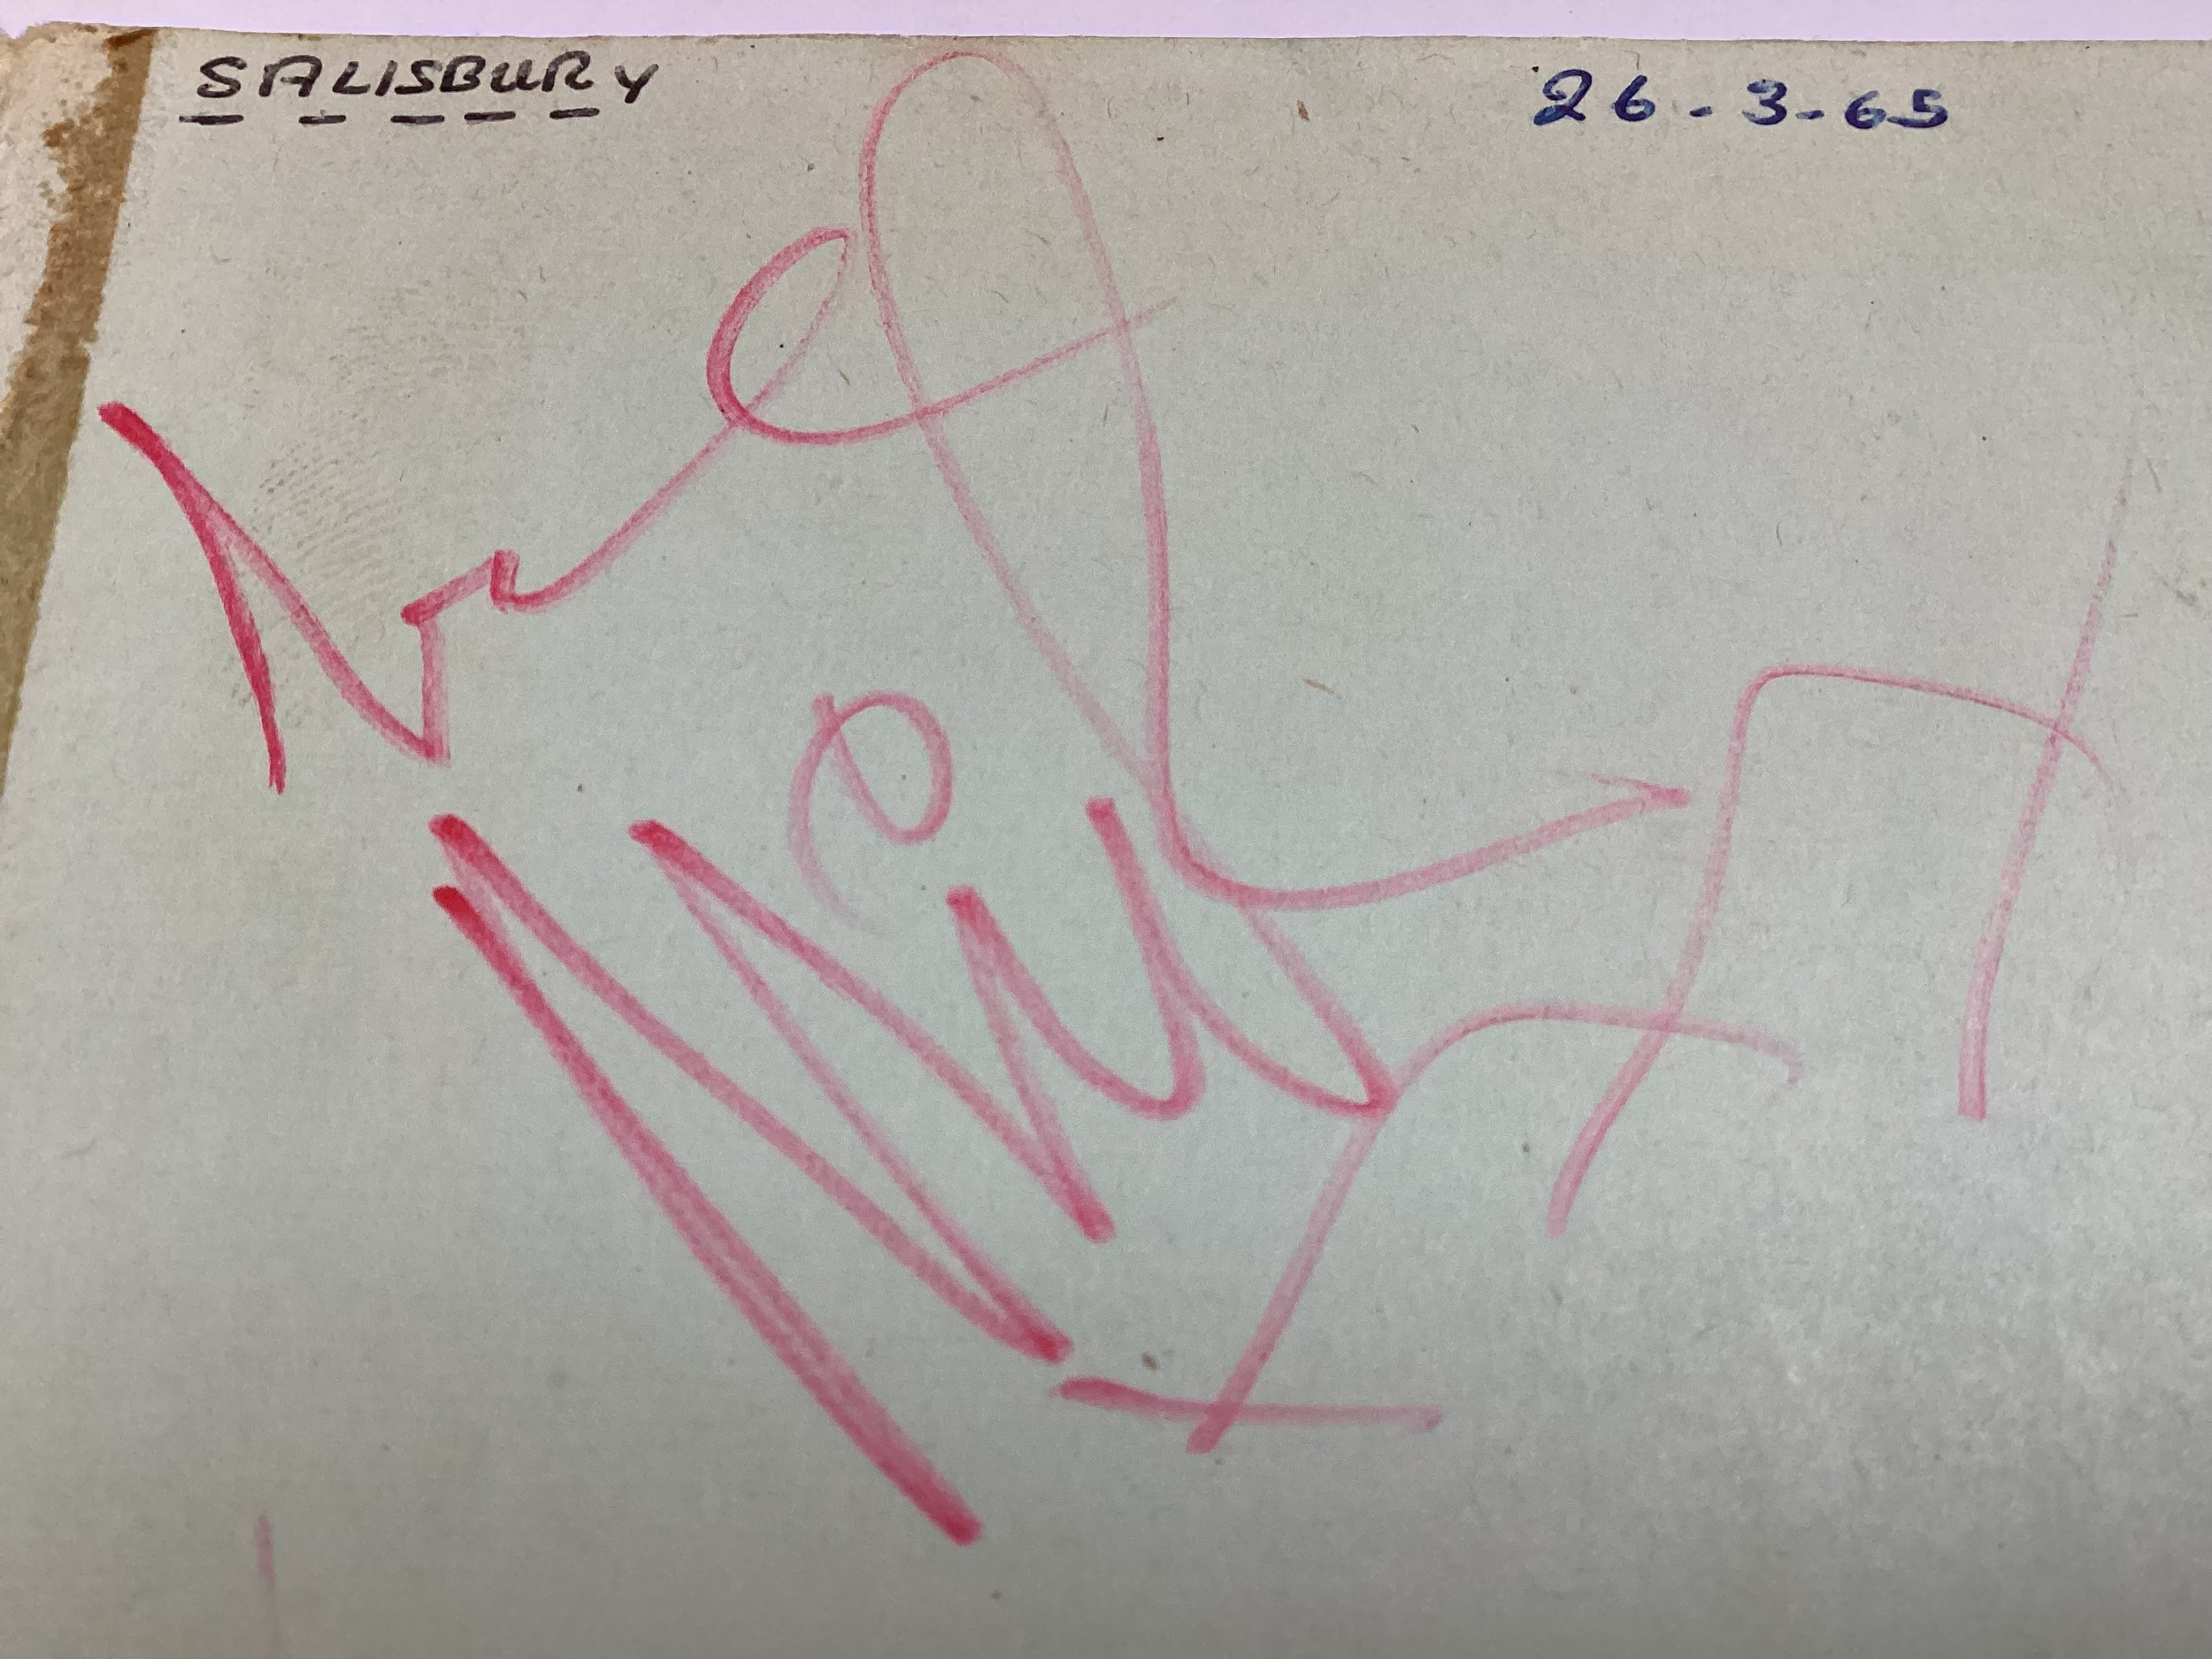 GENUINE 1960’S AUTOGRAPH BOOK CONTAINING VARIOUS POP / ROCK STARS. The book has seen better days - Image 8 of 14